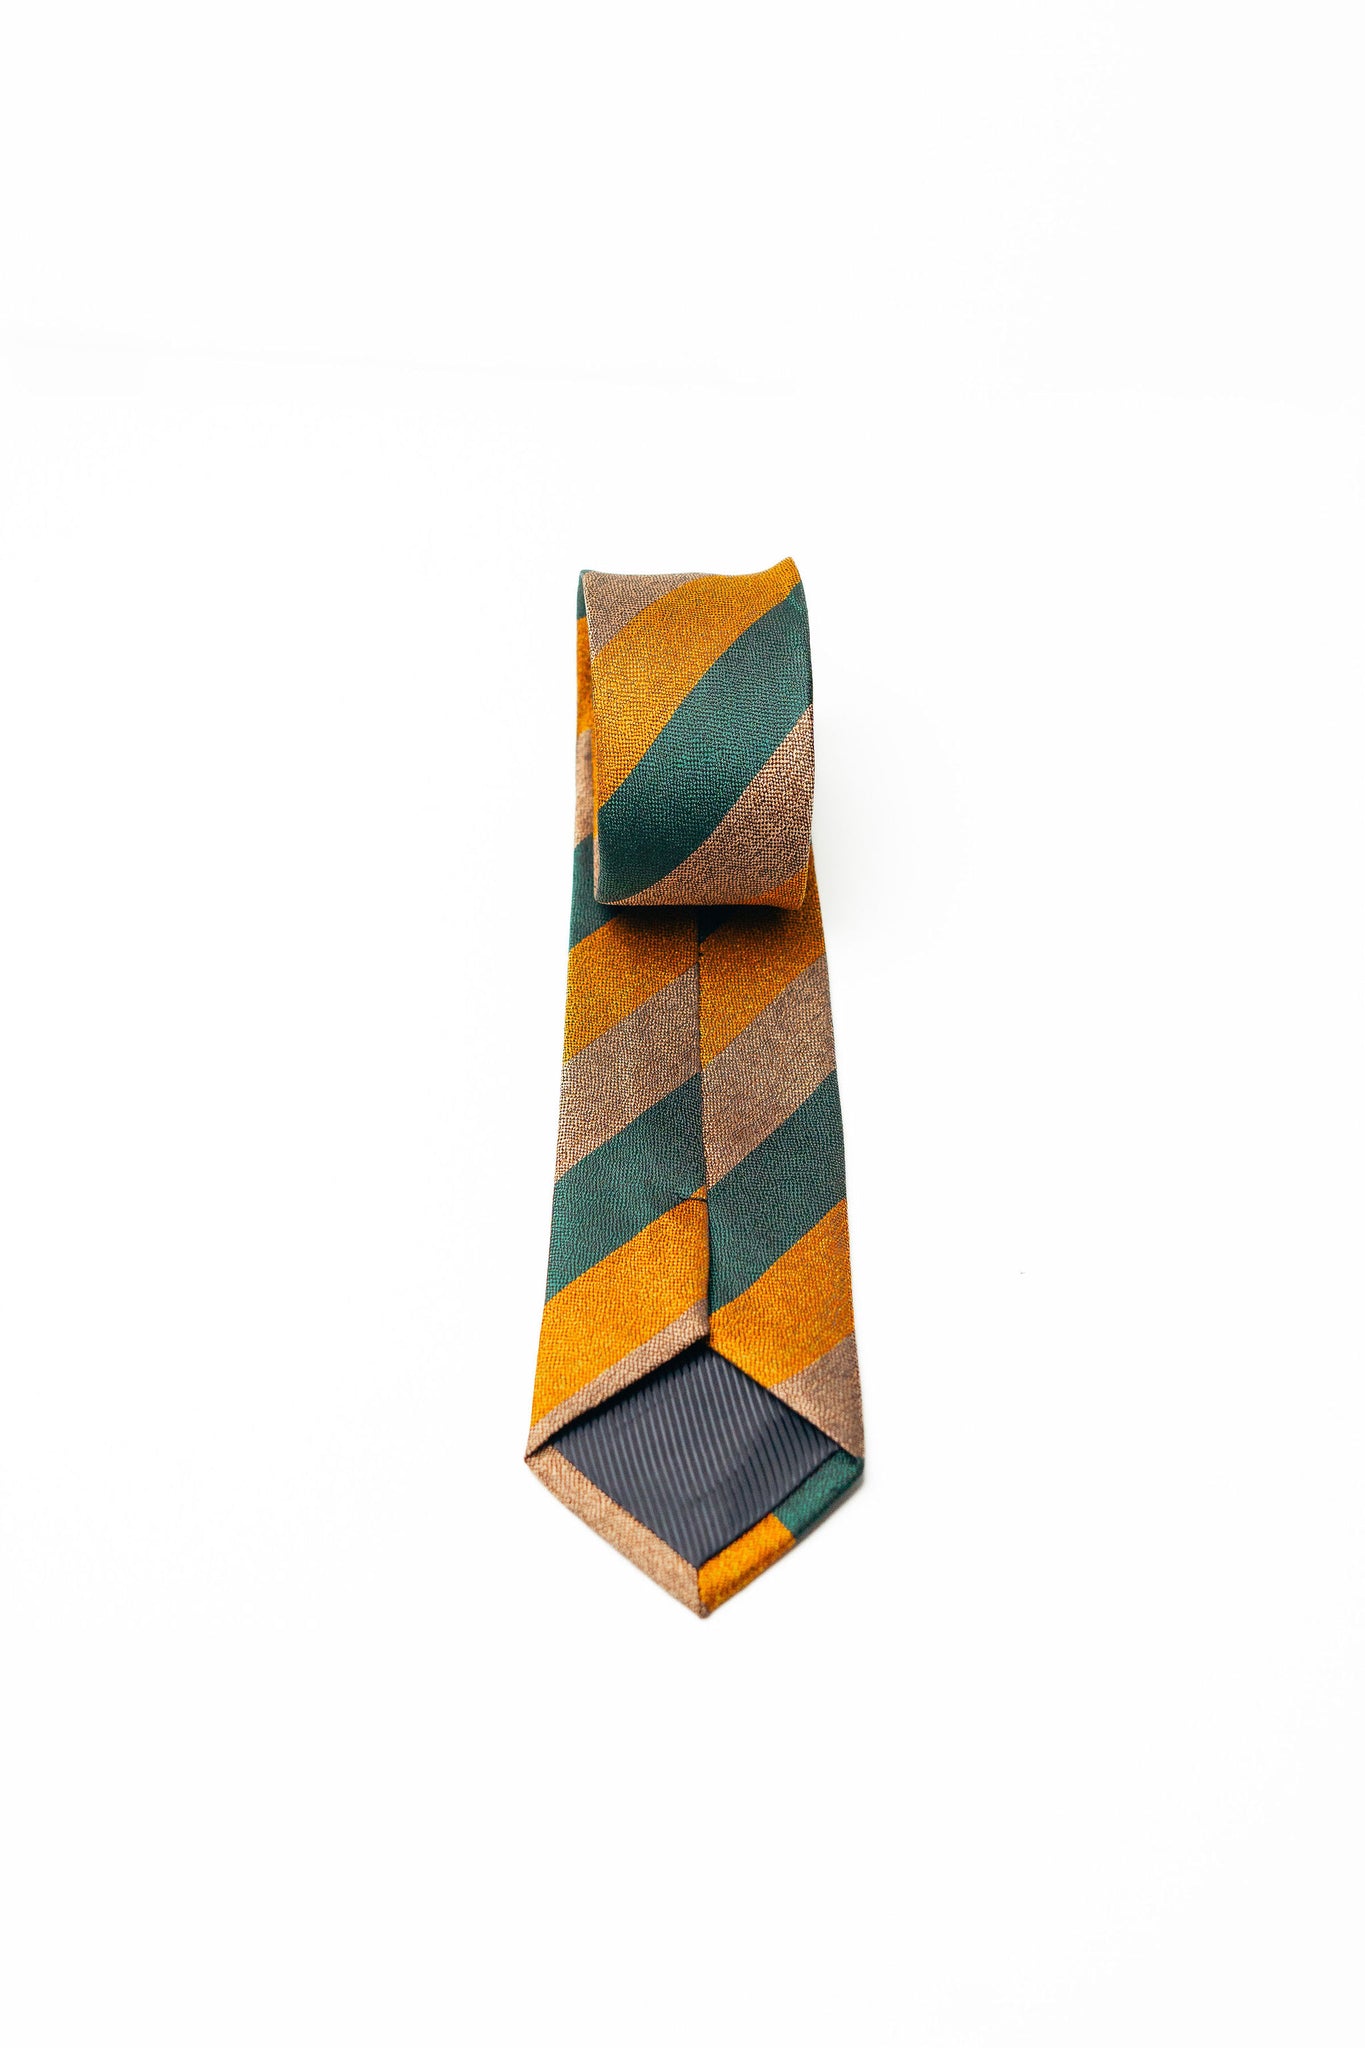 Olive Green With Gold Stripes Tie Set